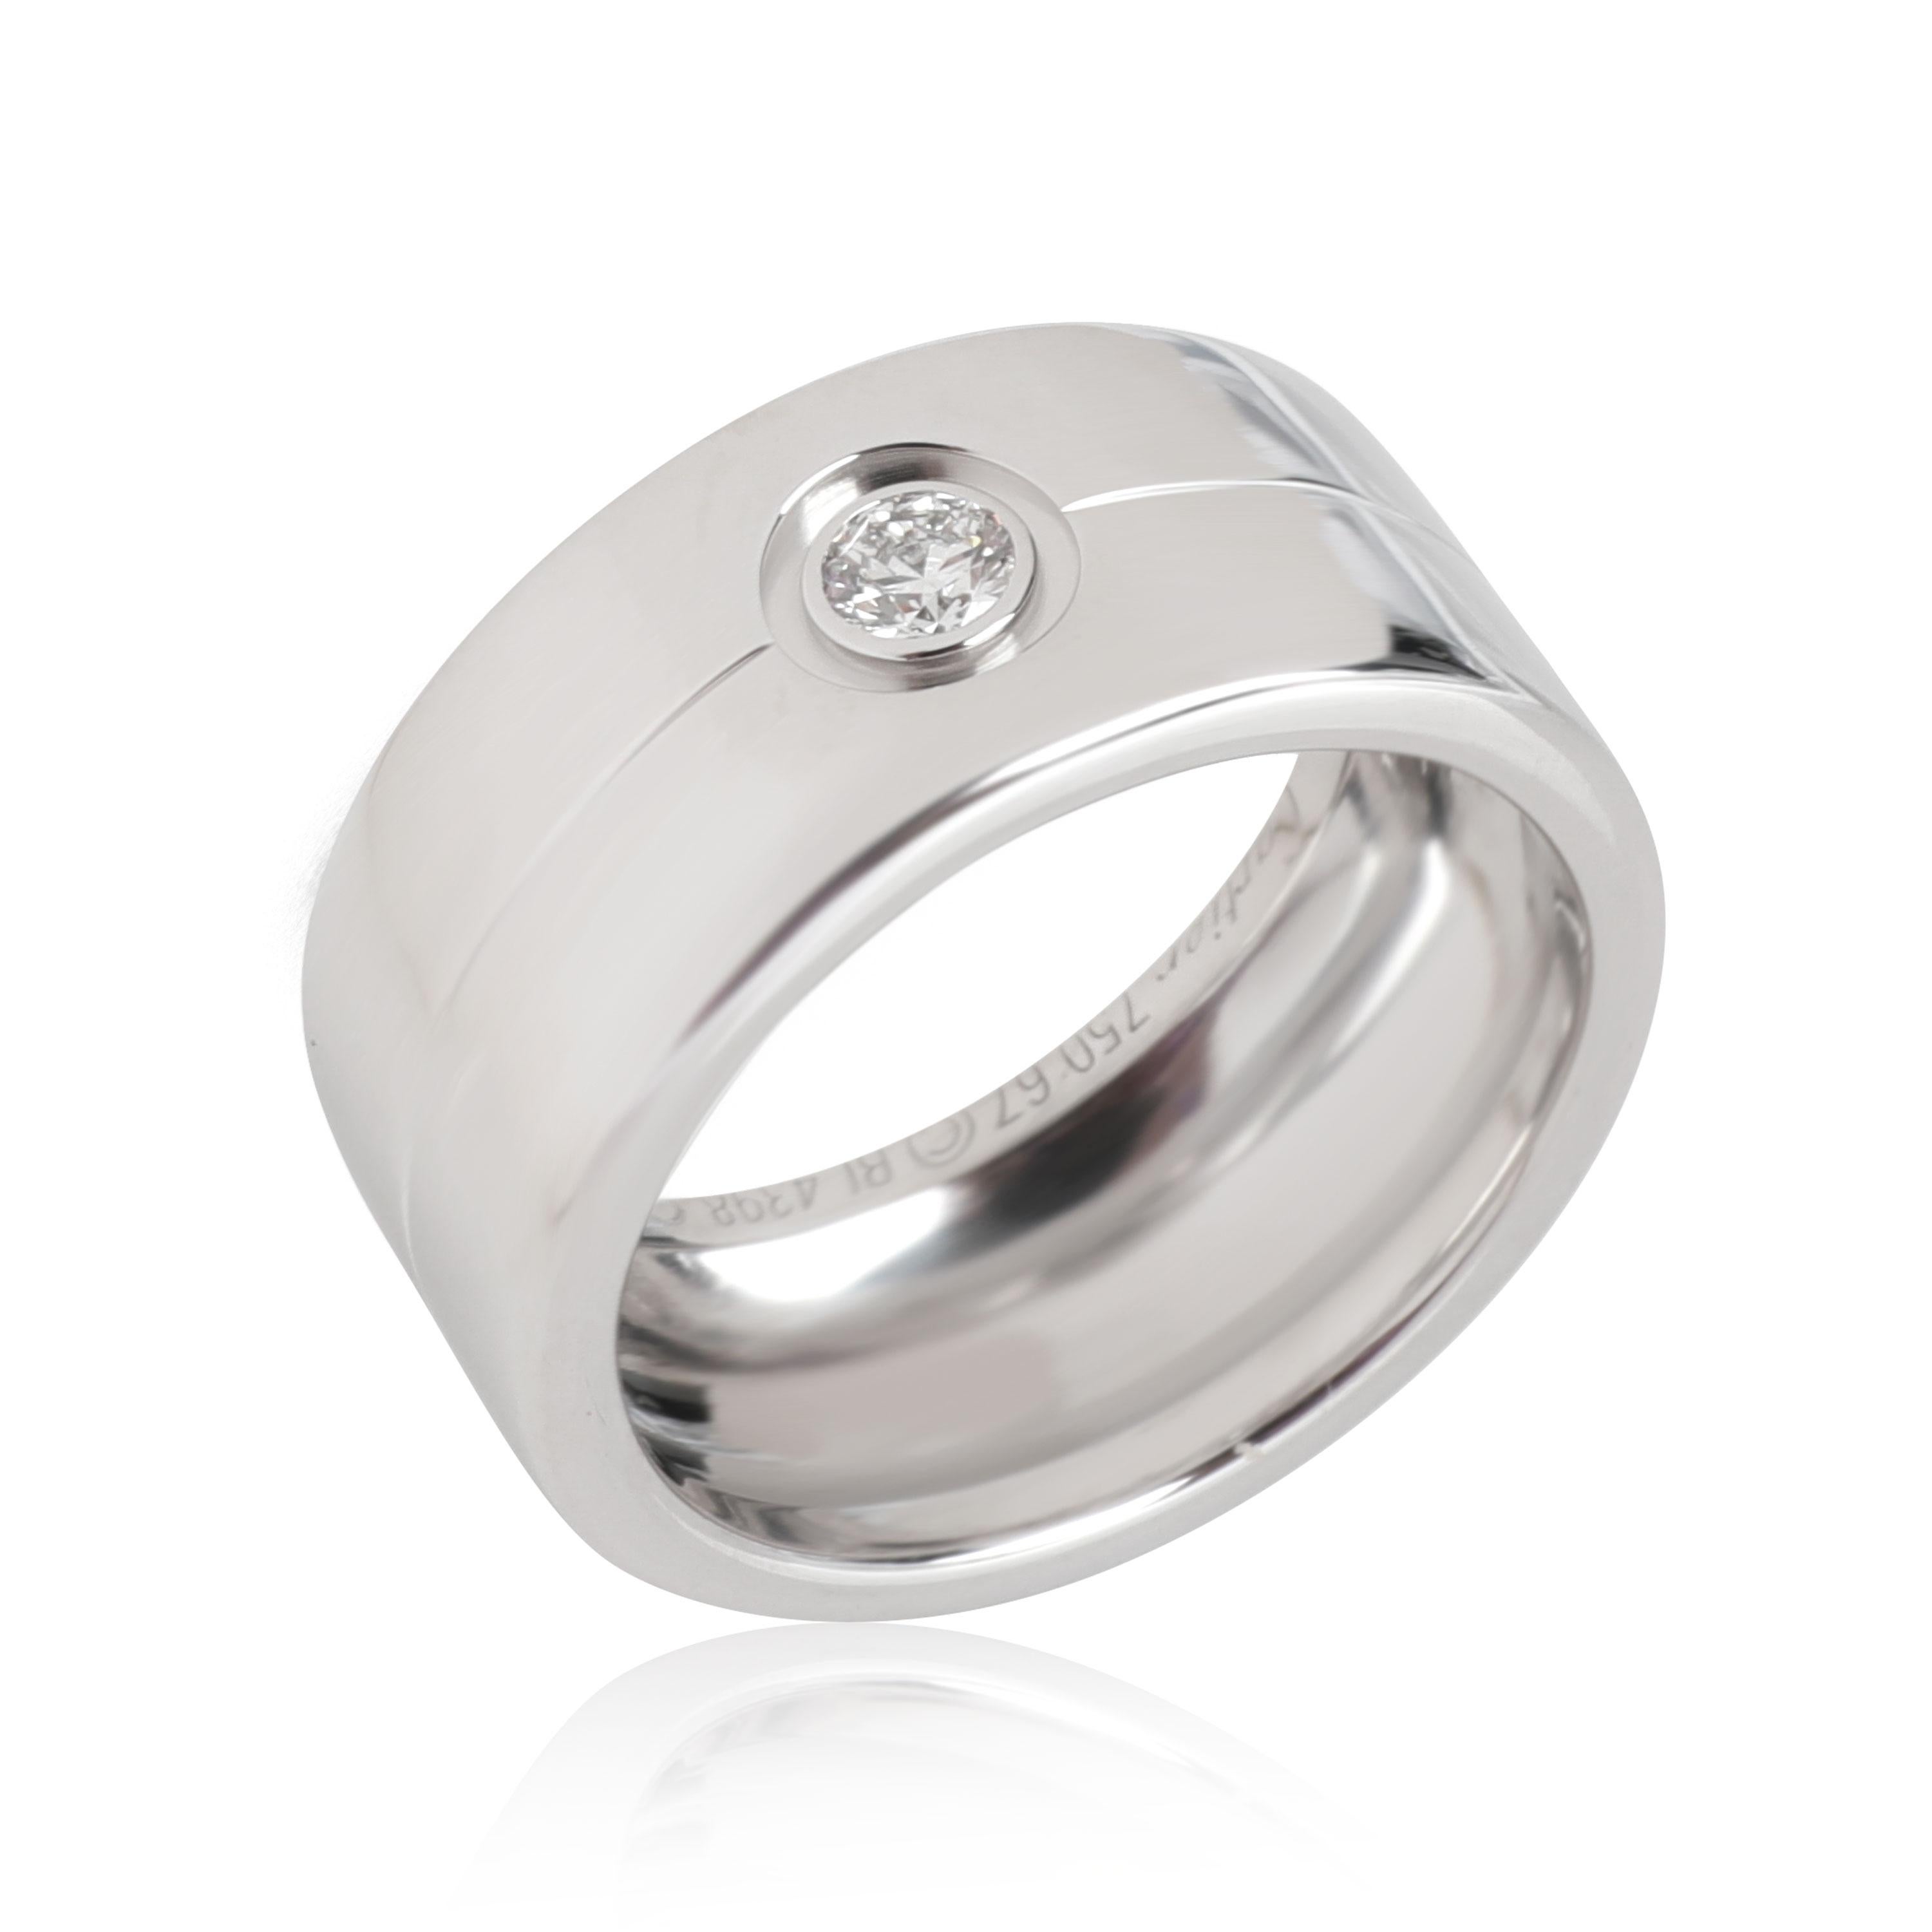 Cartier High Love Diamond Ring in 18K White Gold 0.25 CTW

PRIMARY DETAILS
SKU: 114007
Listing Title: Cartier High Love Diamond Ring in 18K White Gold 0.25 CTW
Condition Description: Retails for 7500 USD. In excellent condition and recently